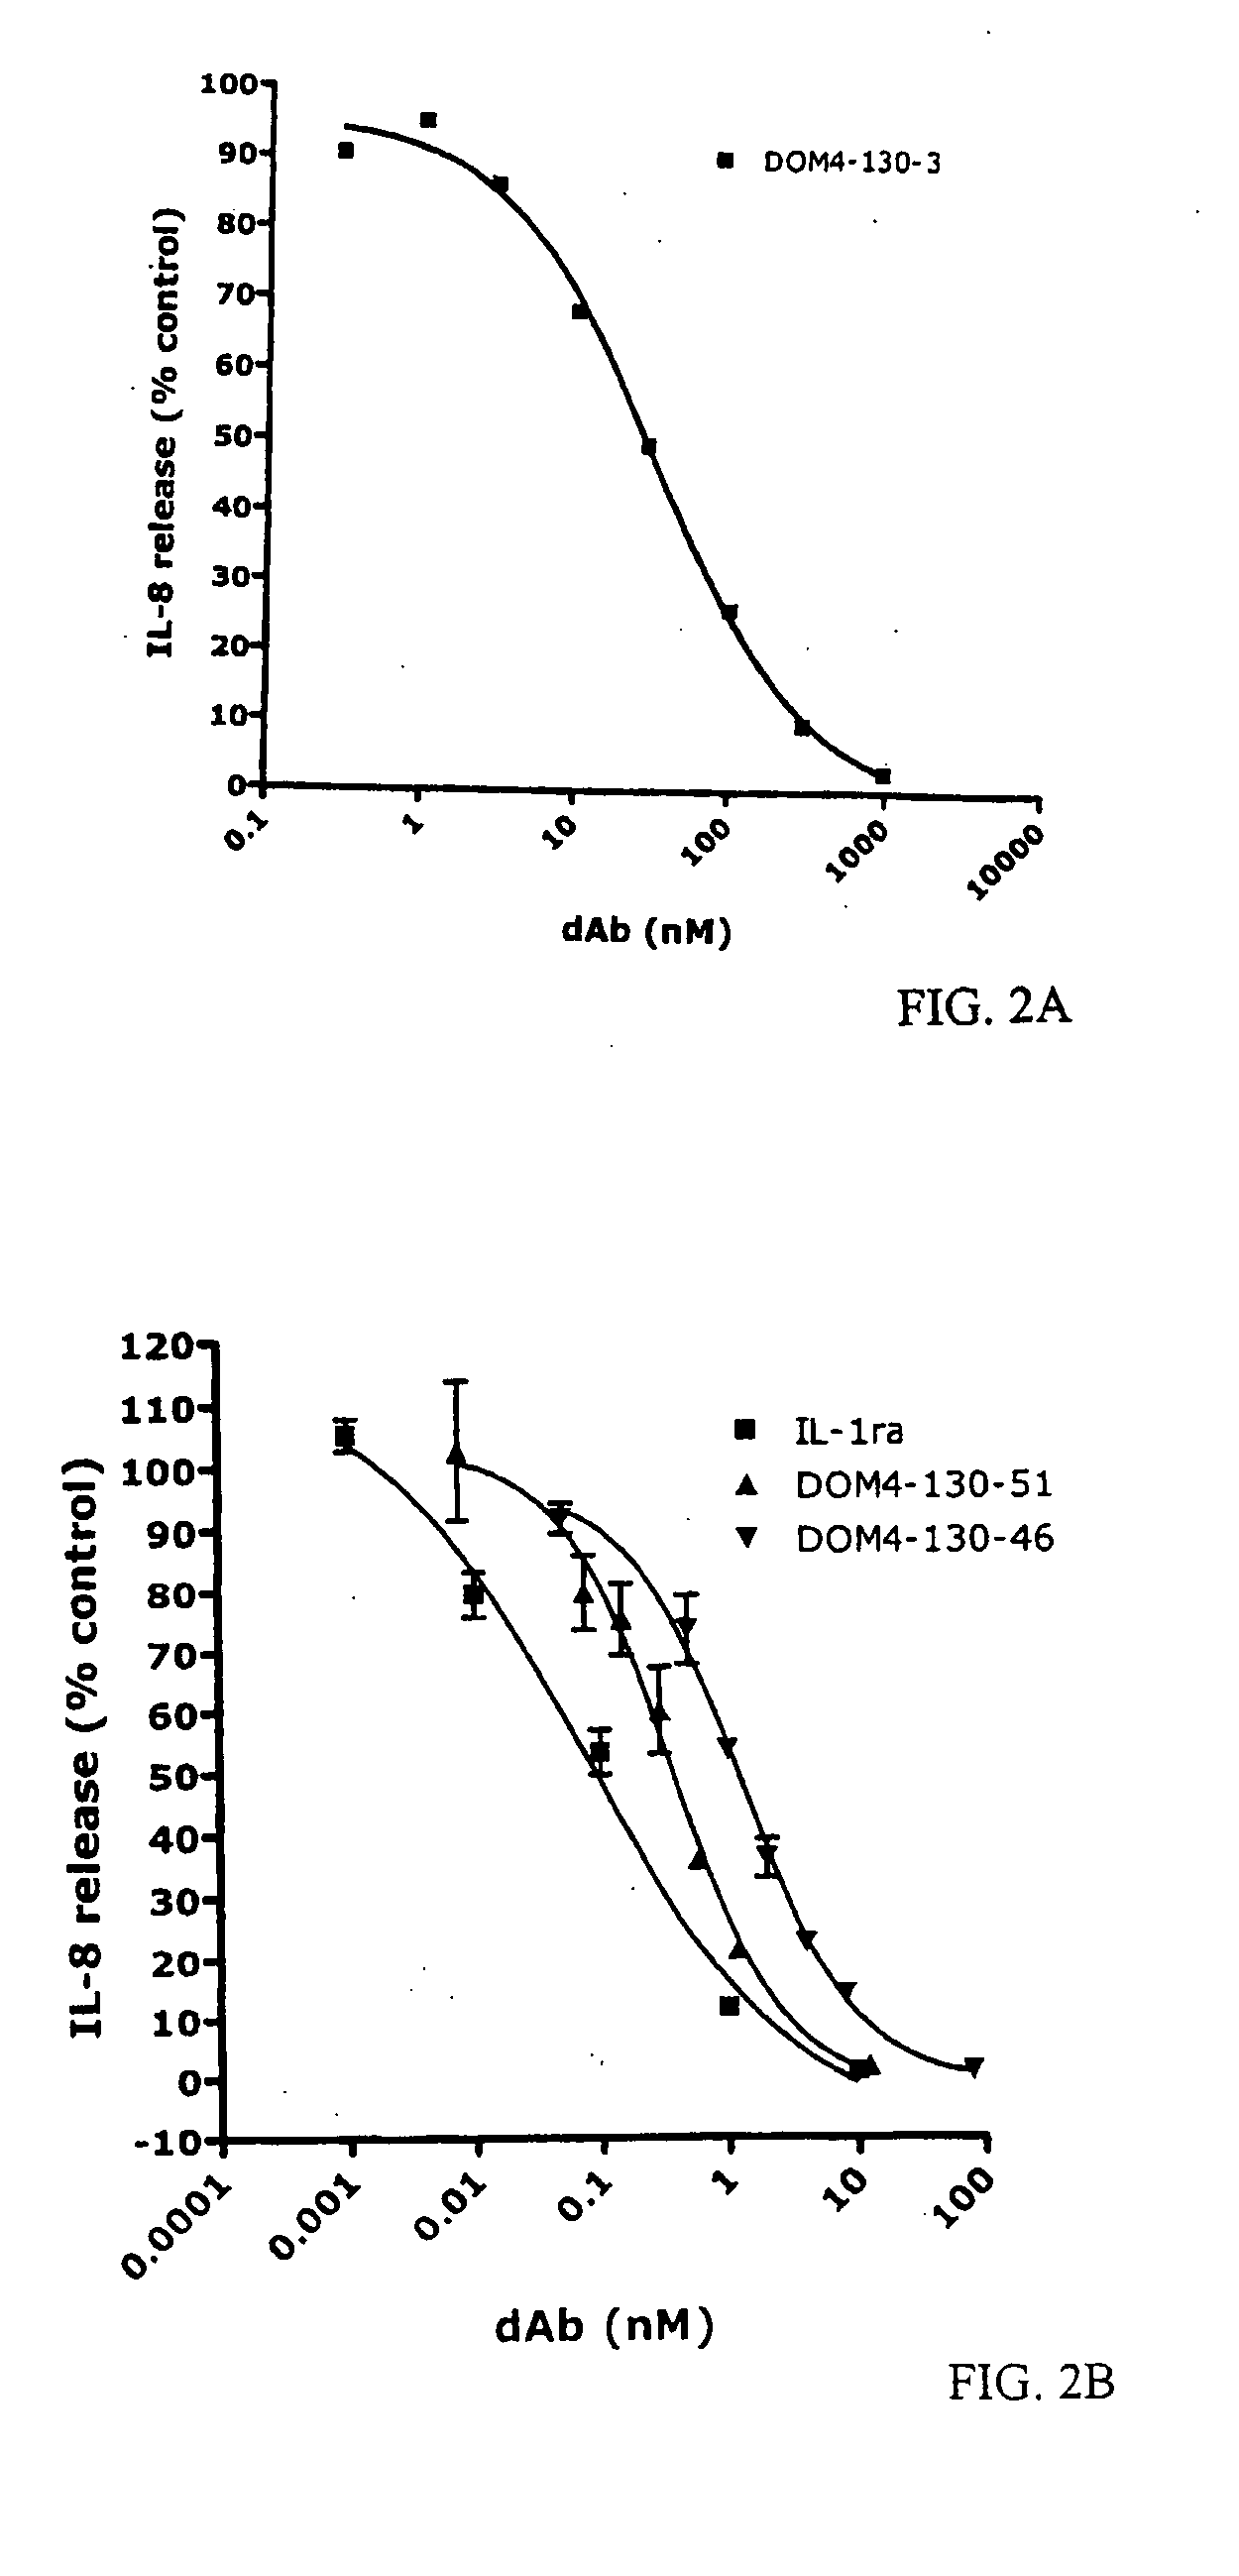 Anti-IL-1R1 Single Domain Antibodies And Therapeutic Uses